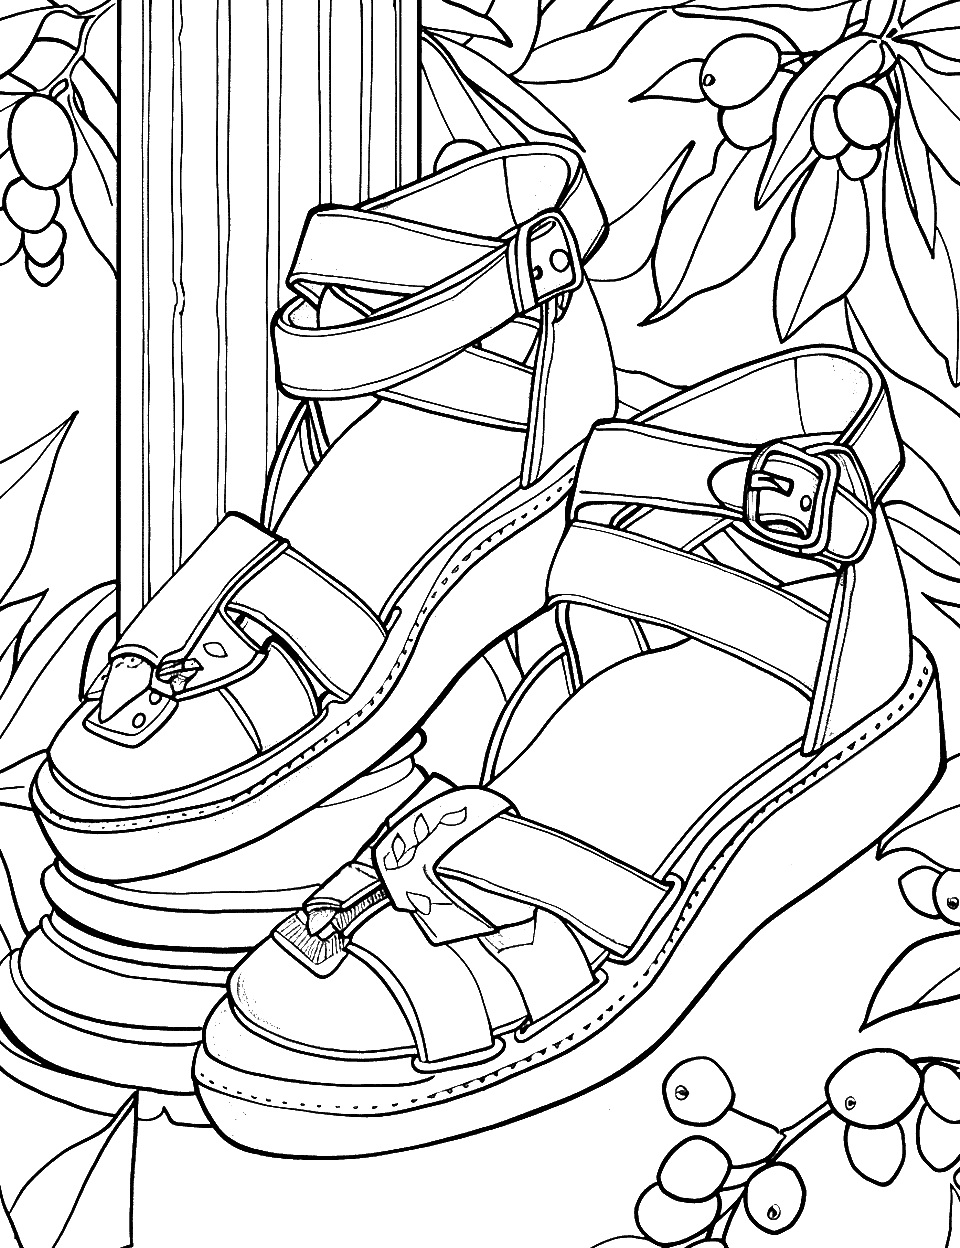 Gladiator Sandals in the Arena Shoe Coloring Page - Strappy gladiator sandals with a classic column and olive leaves in the background.